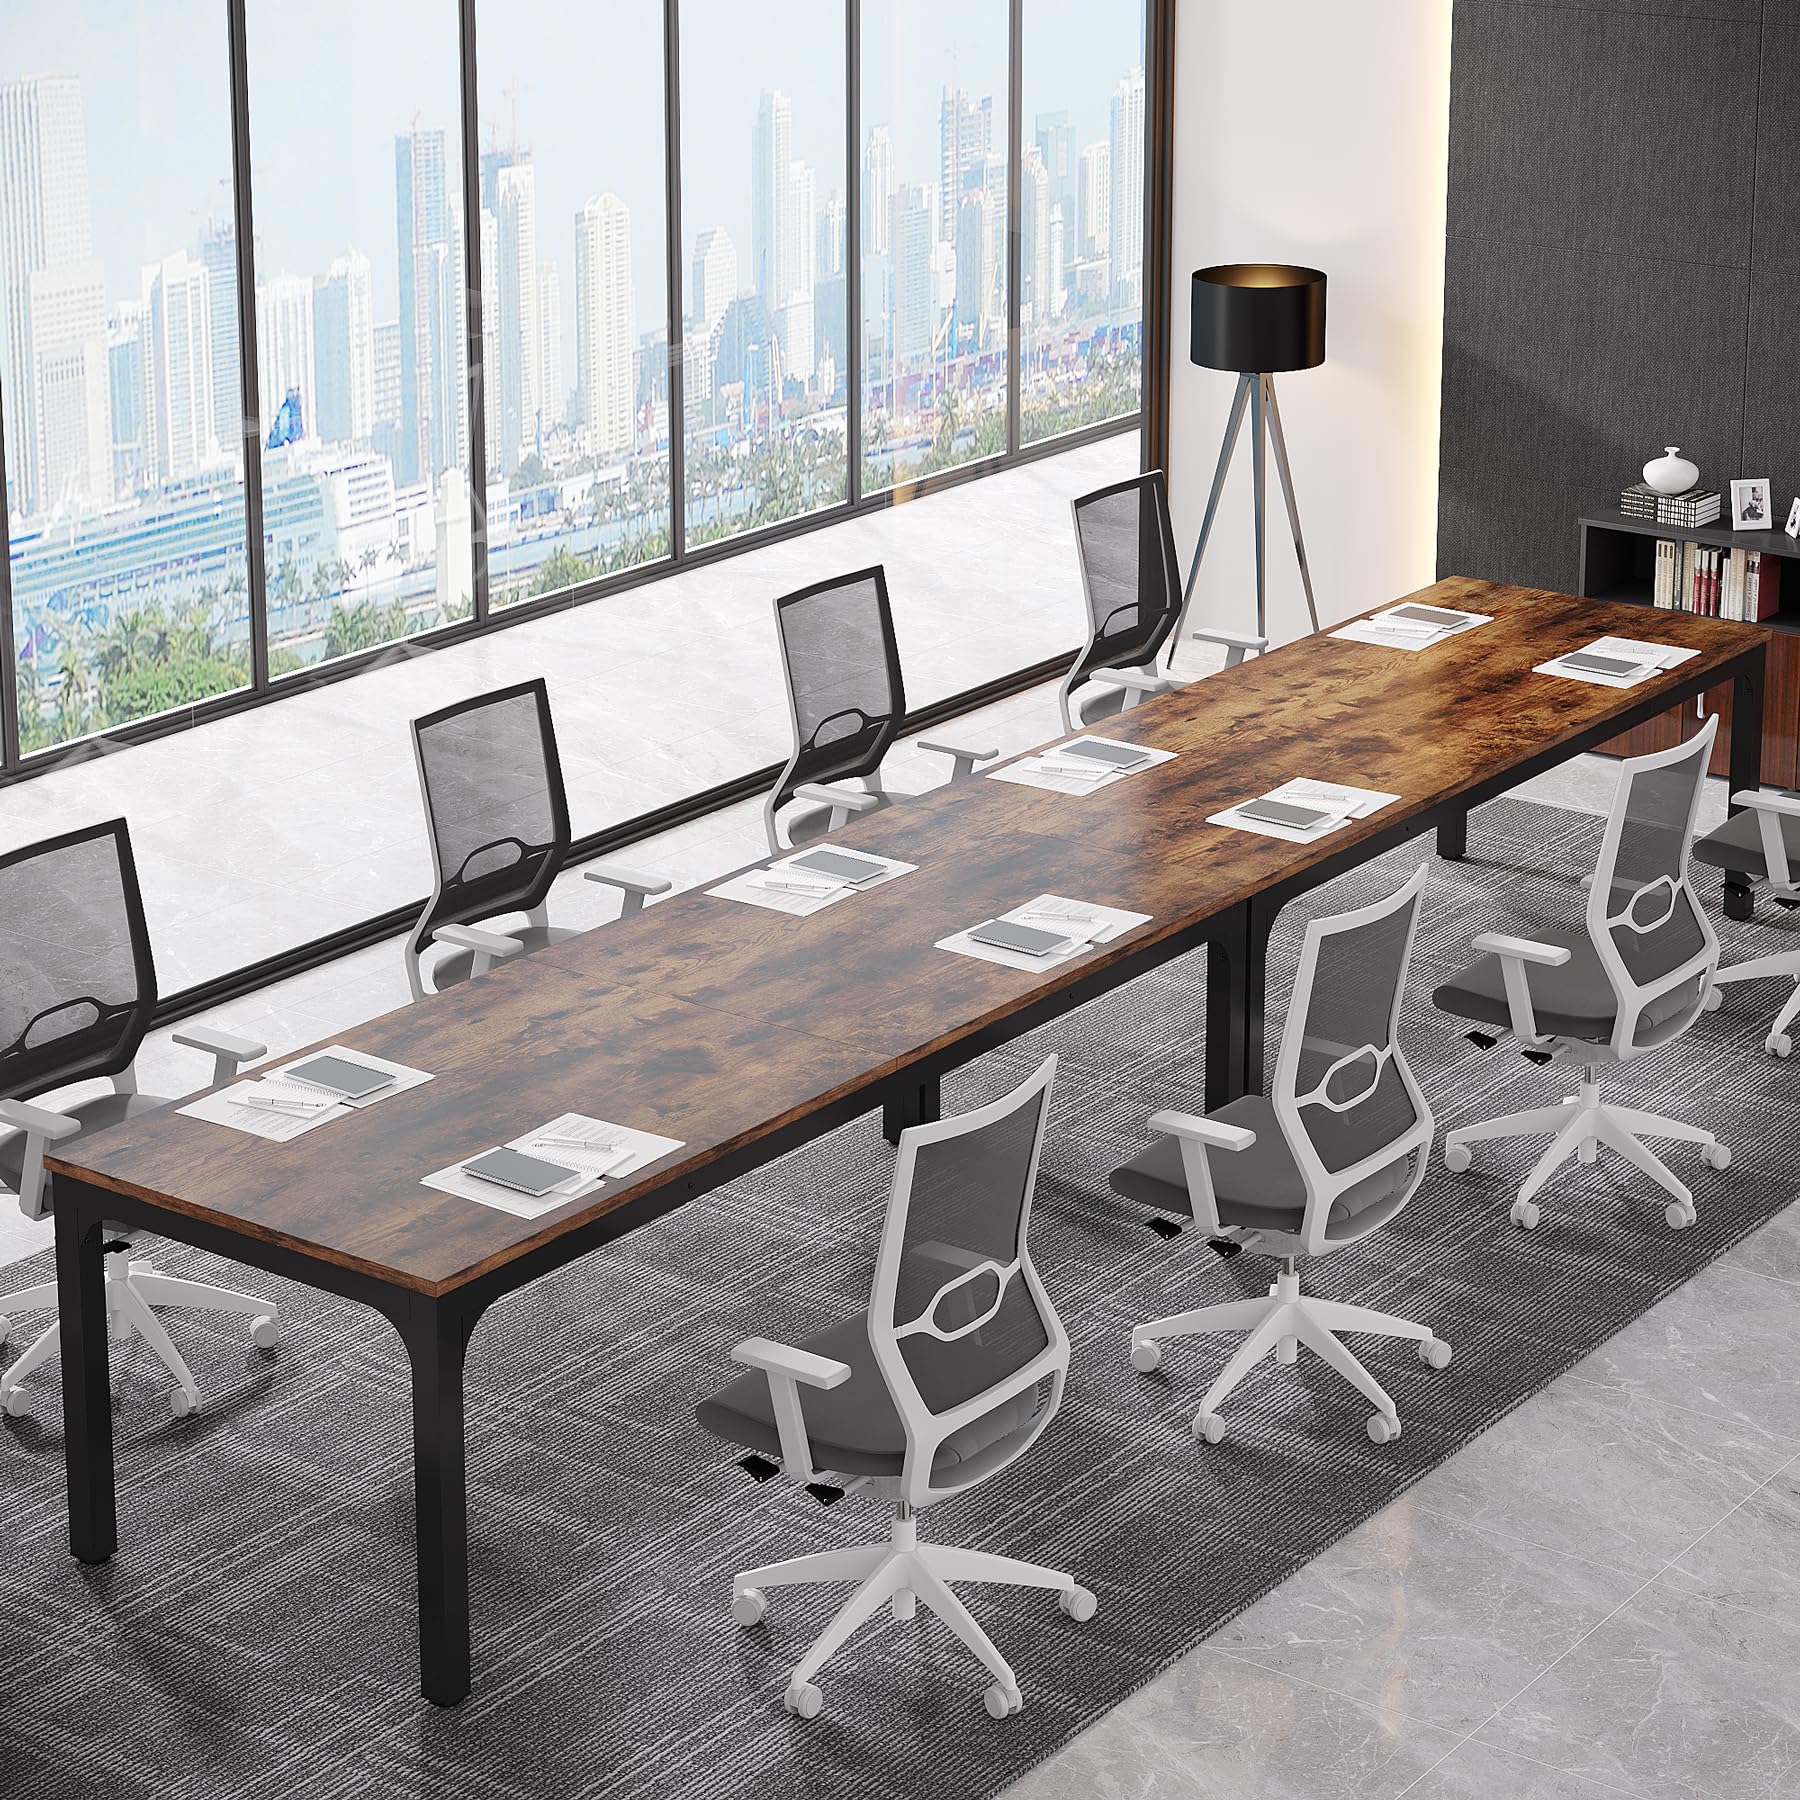 Tribesigns 6.5FT Conference Table, 78.7 Inche Rectangle Meeting Seminar Table, Large Business Tables for 6-8 People (Only Table)